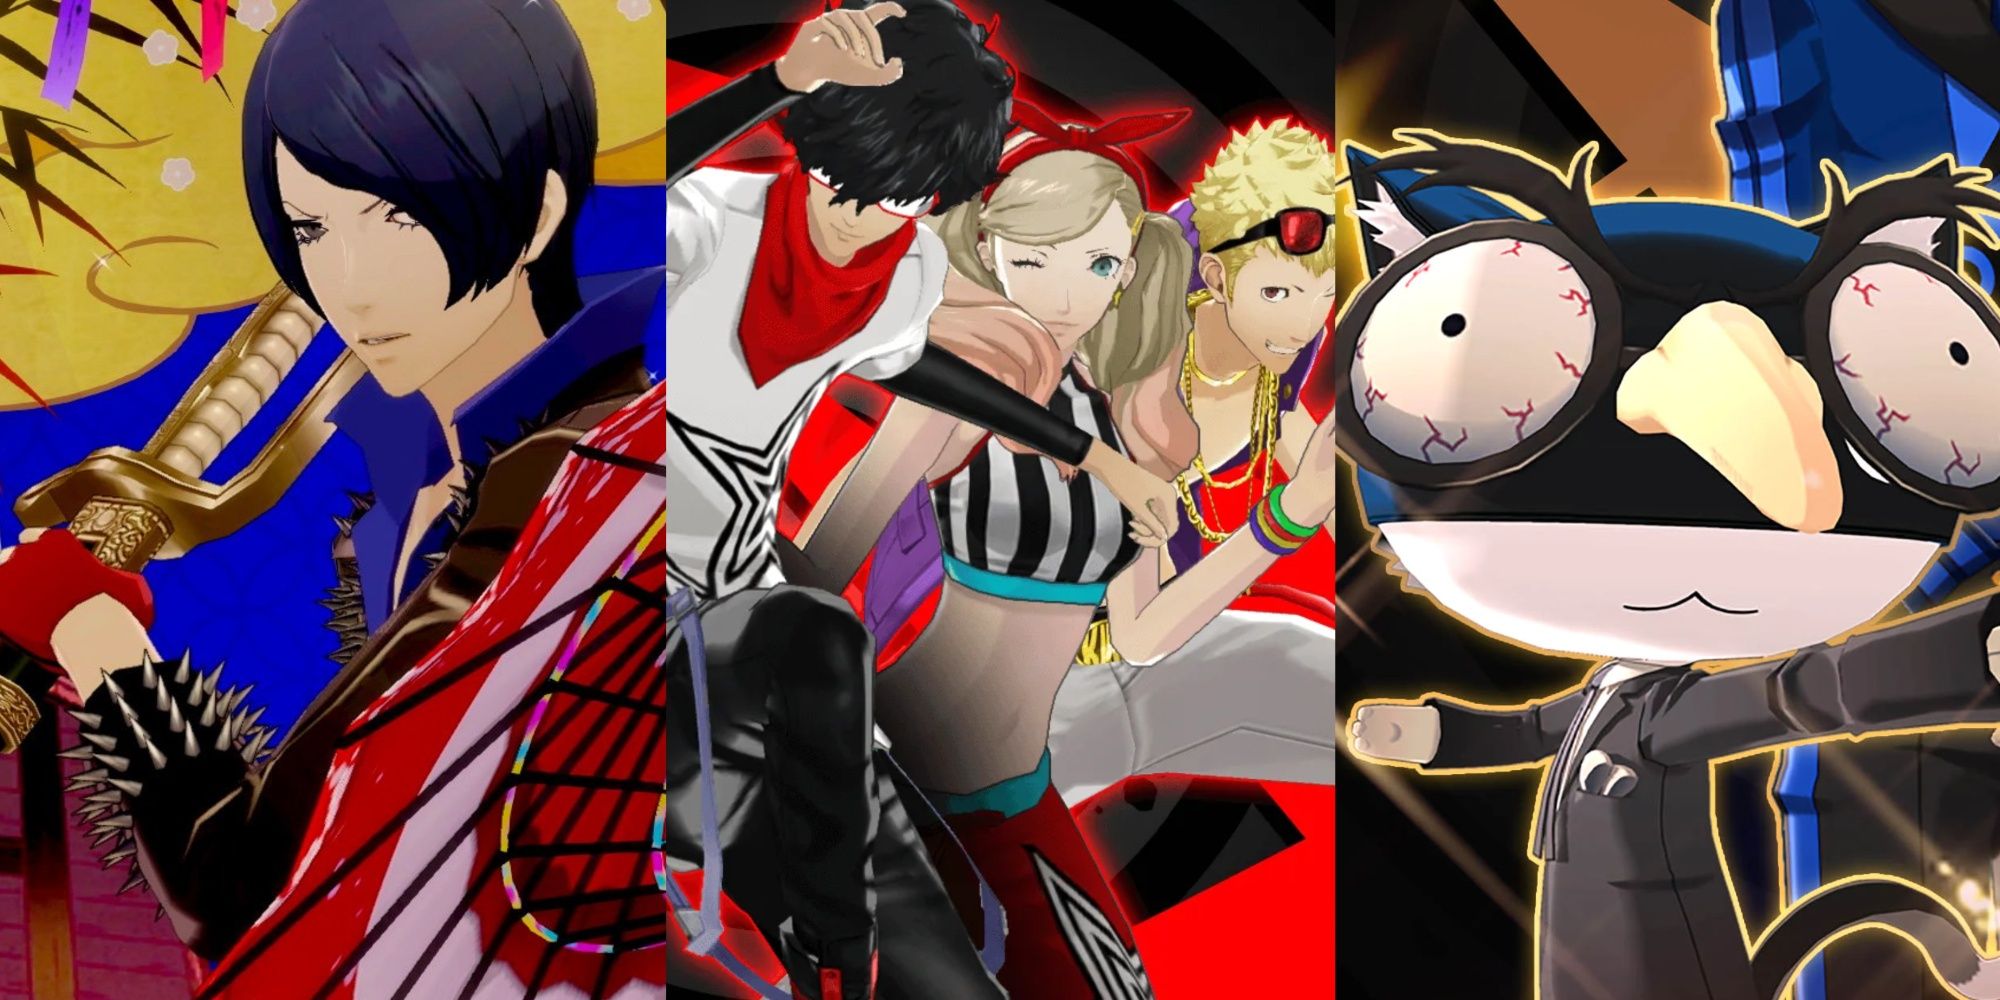 Yusuke in his P5D costume during Showtime, Joker, Ann, and Ryuji smiling in their P4D costumes, and Morgana posing while dressed as Igor